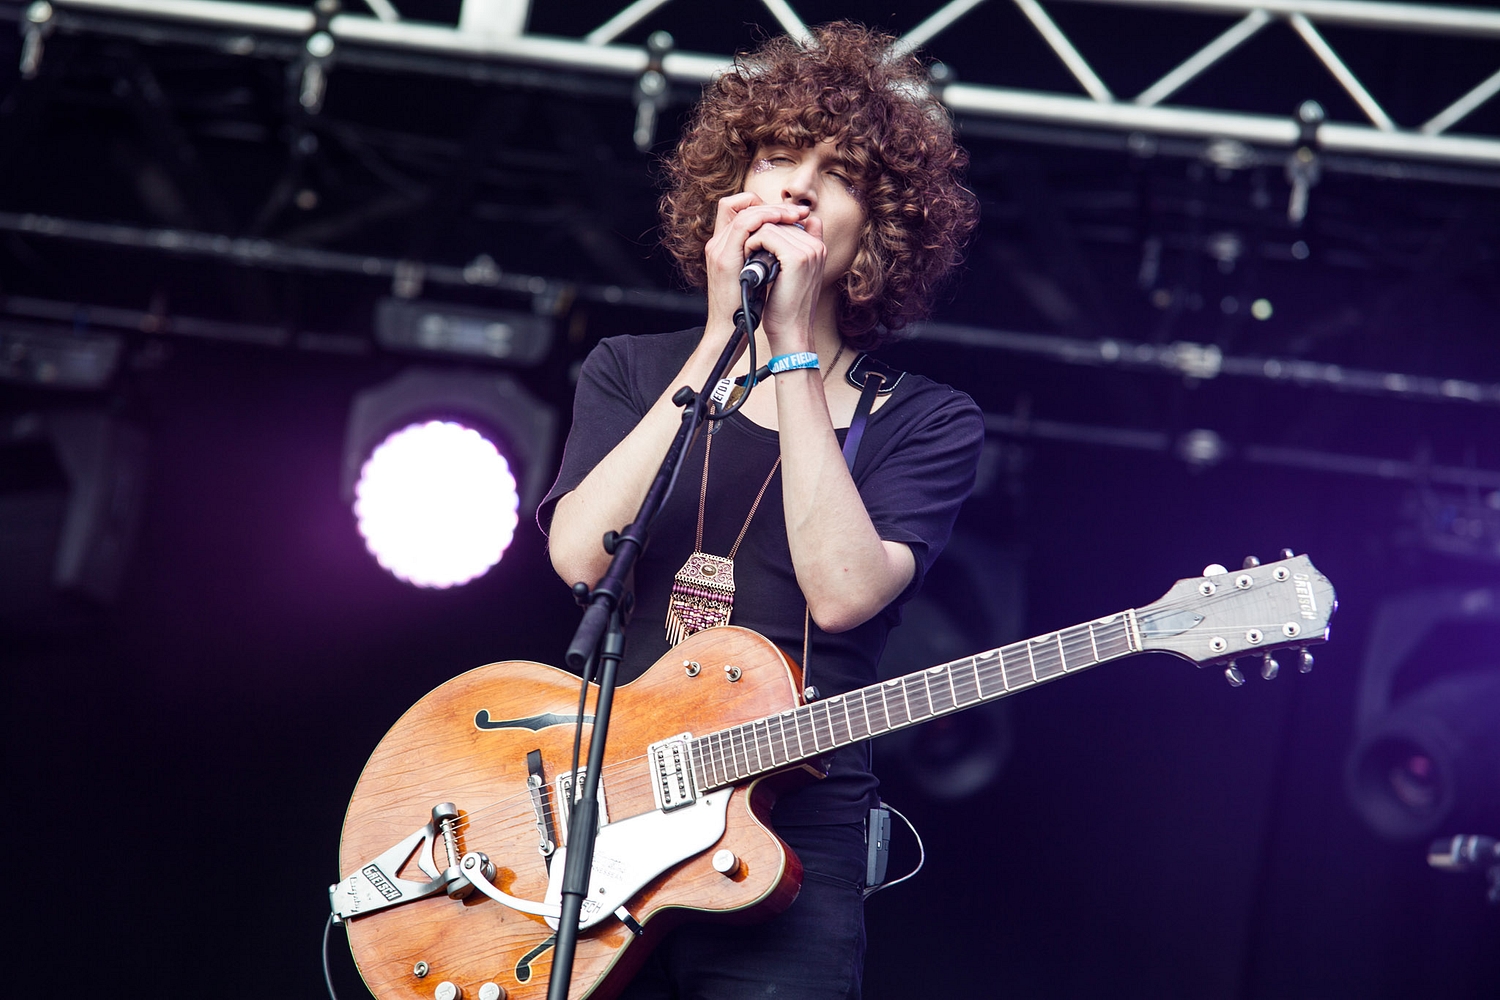 Temples, Palma Violets, Hinds, Ibeyi confirmed for Secret Garden Party 2015